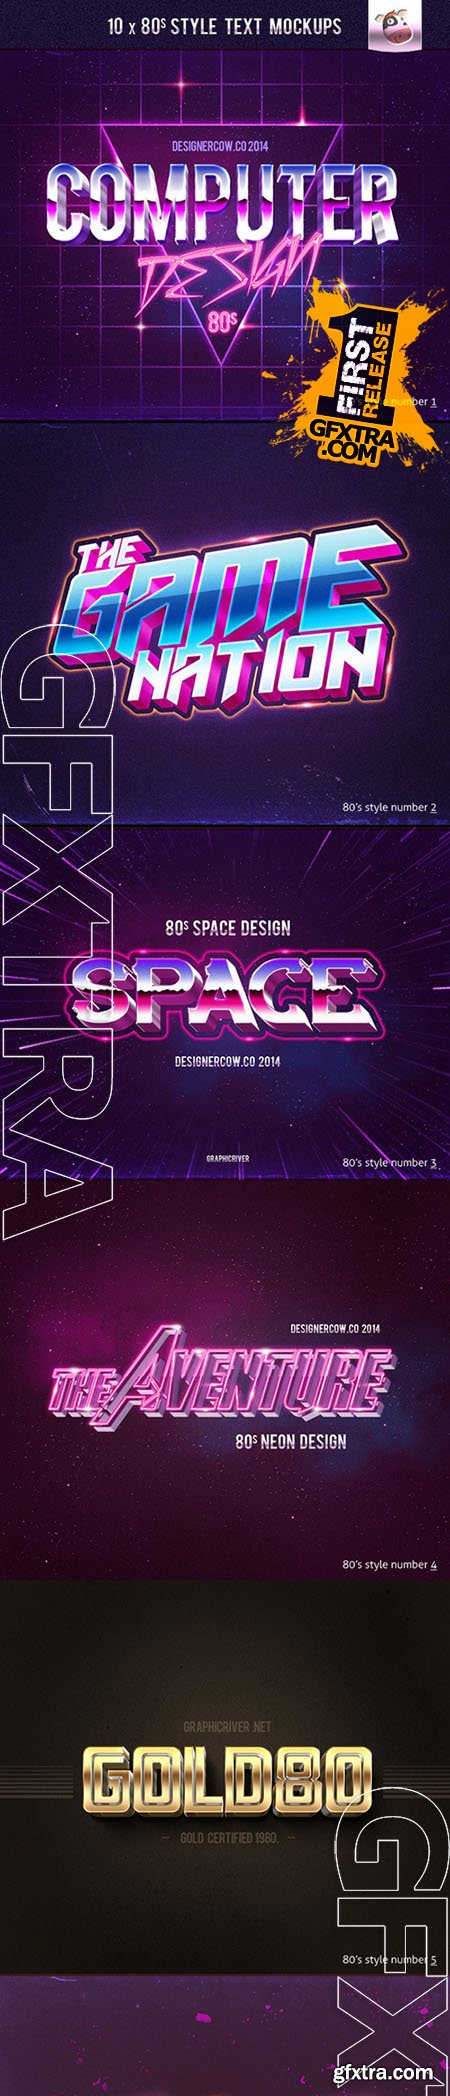 Graphicriver 80\'s Style Text Mockups 8467827